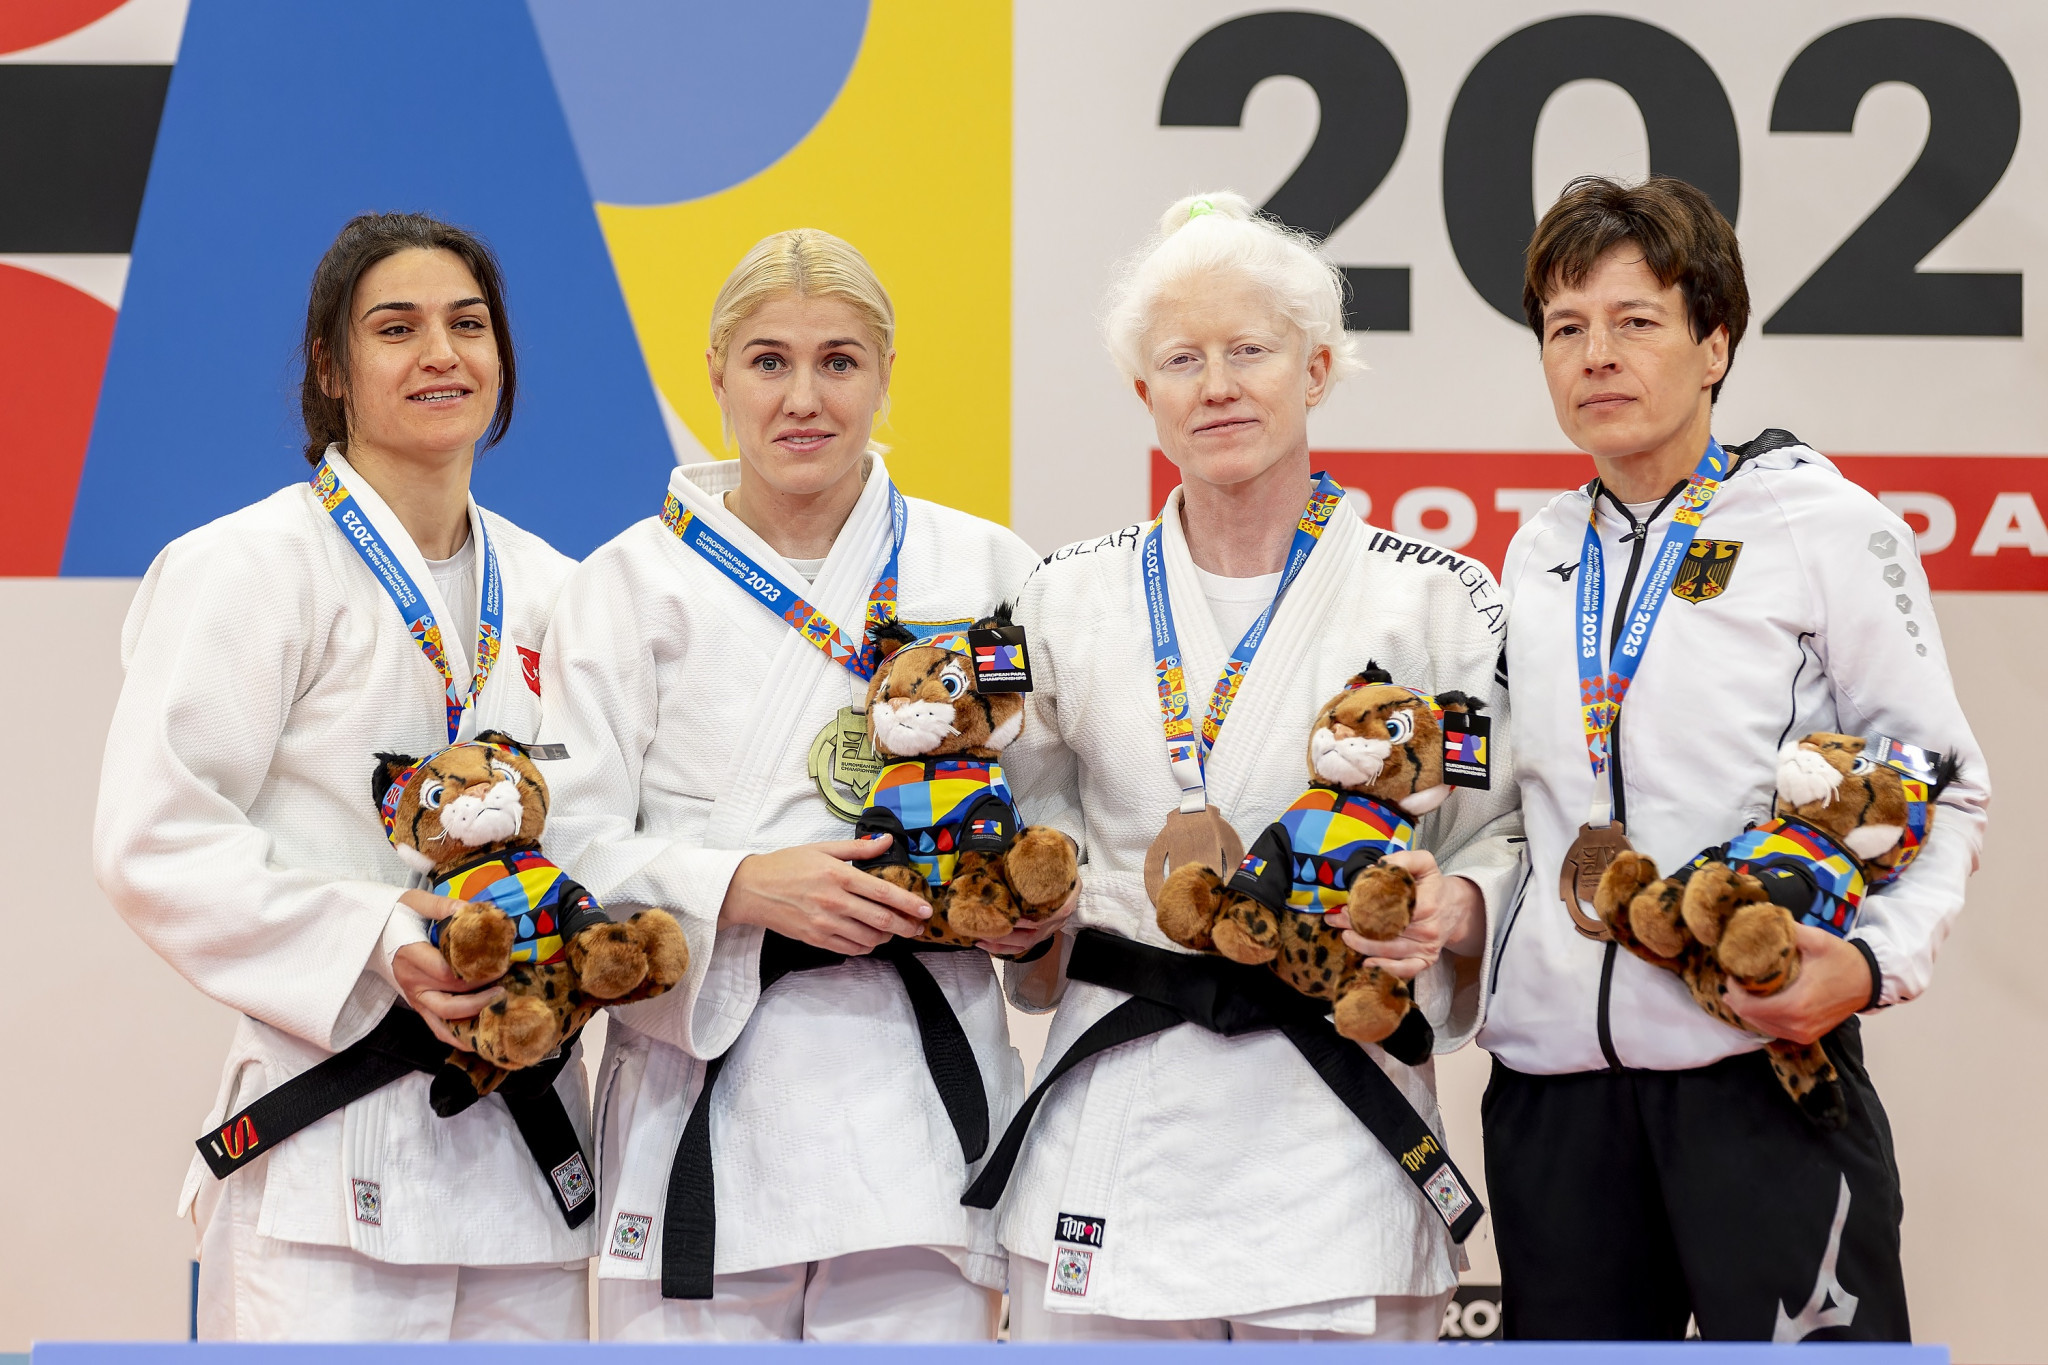 The J2 women’s under-57kg medallists receive their prizes at the medal ceremony ©EPC